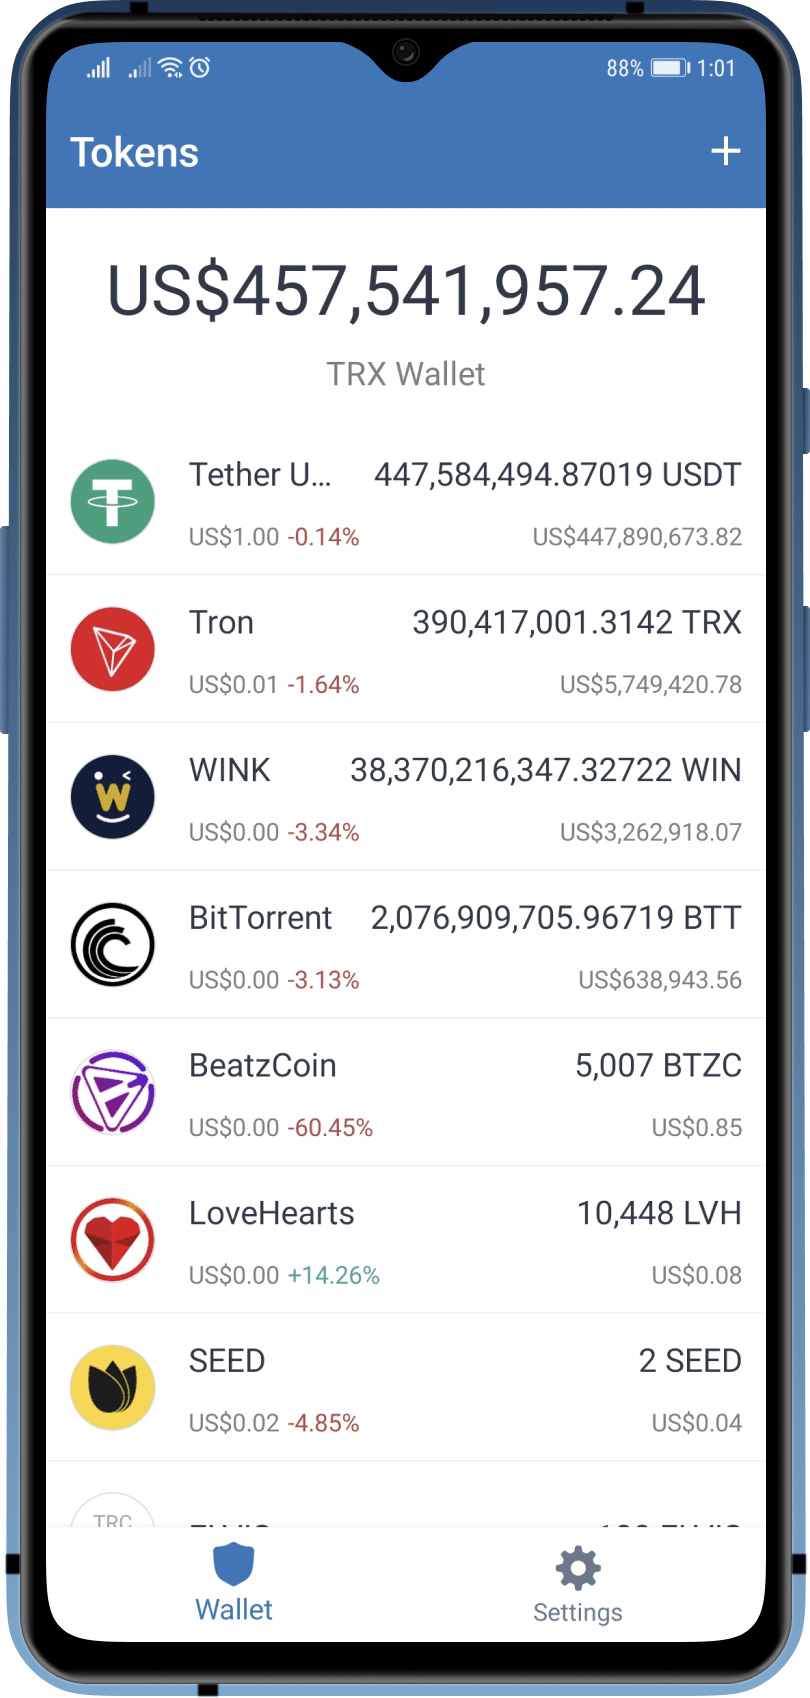 Tokens in the app